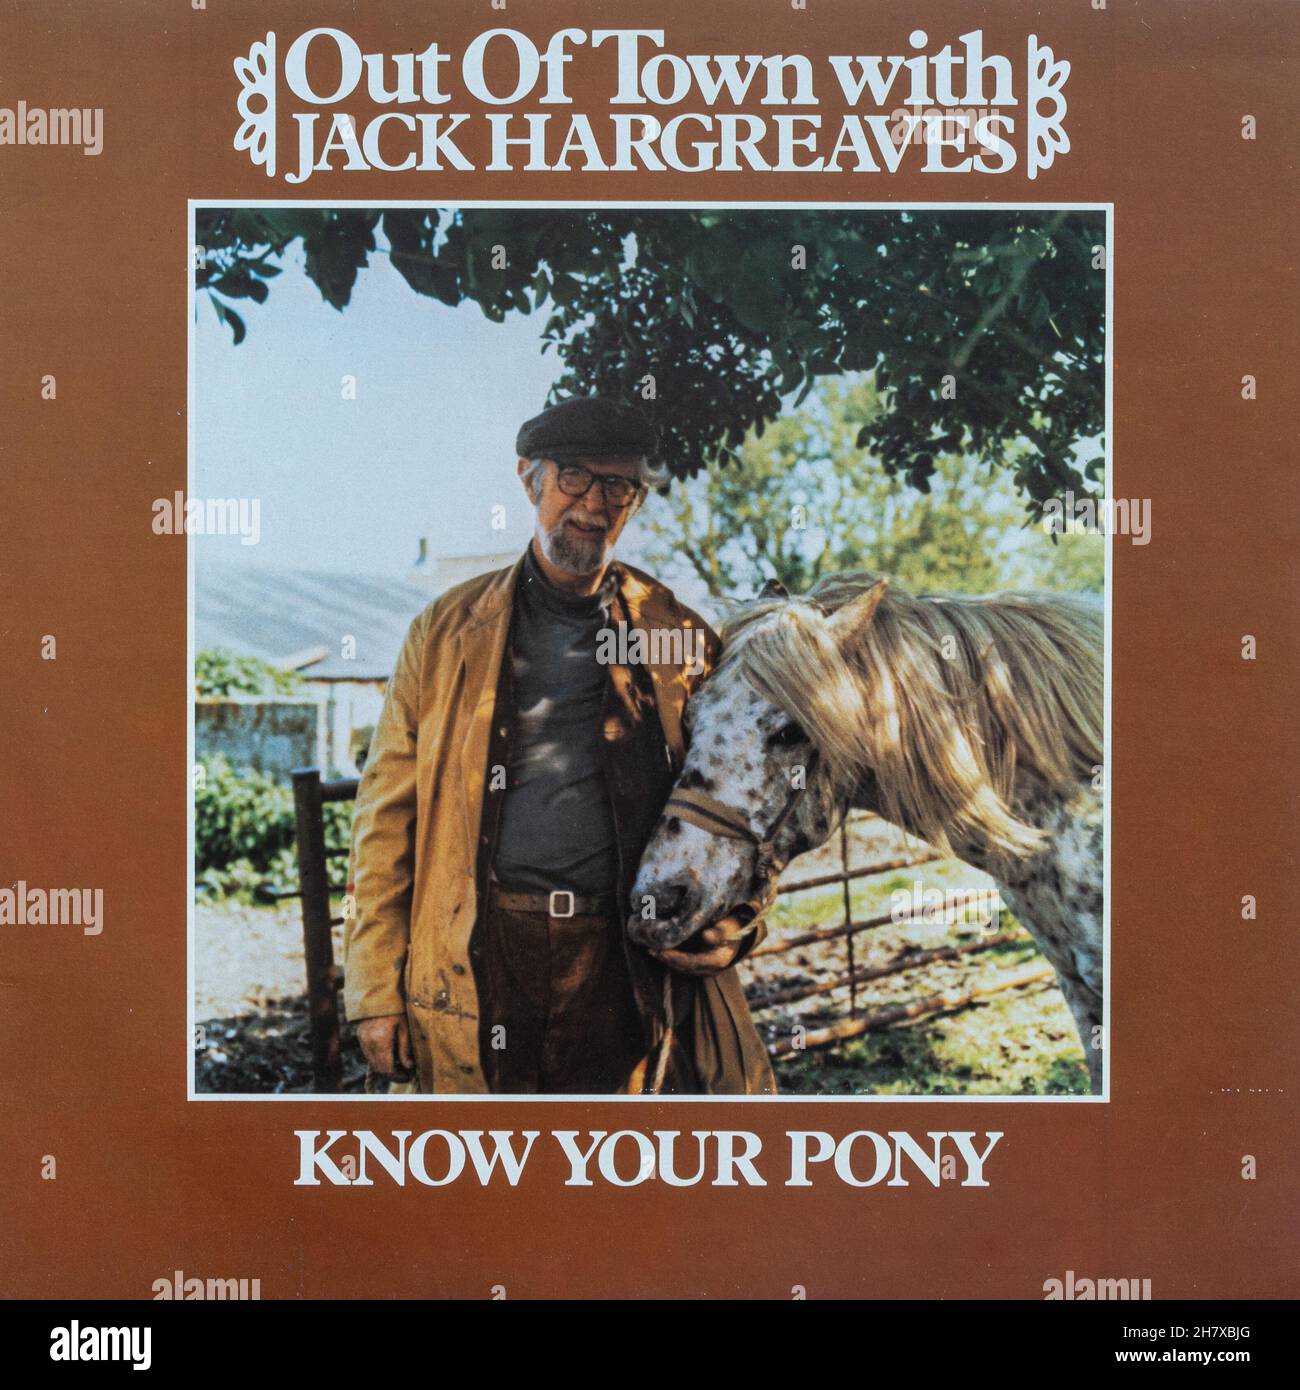 Out of Town with Jack Hargreaves, vinyl LP record cover (know your pony) Stock Photo